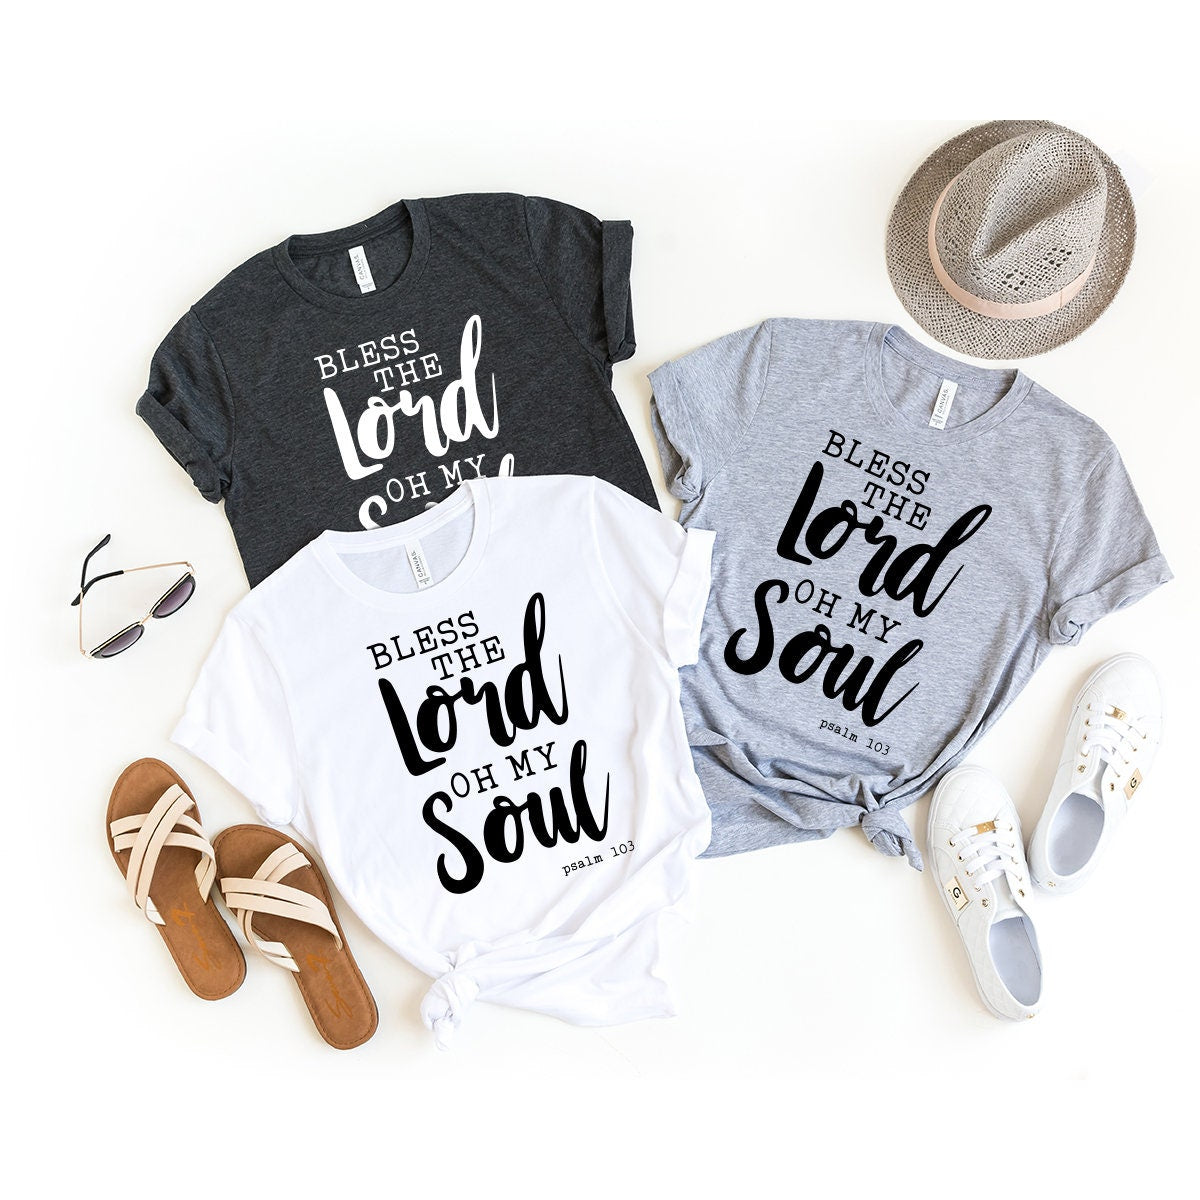 Faith T-Shirt, Psalm 103 Quote Shirt, Christian Shirt, Bible Shirt, Bless The Lord Oh My Soul Shirt, Christianity Tee, Thanksgiving Tee - Fastdeliverytees.com